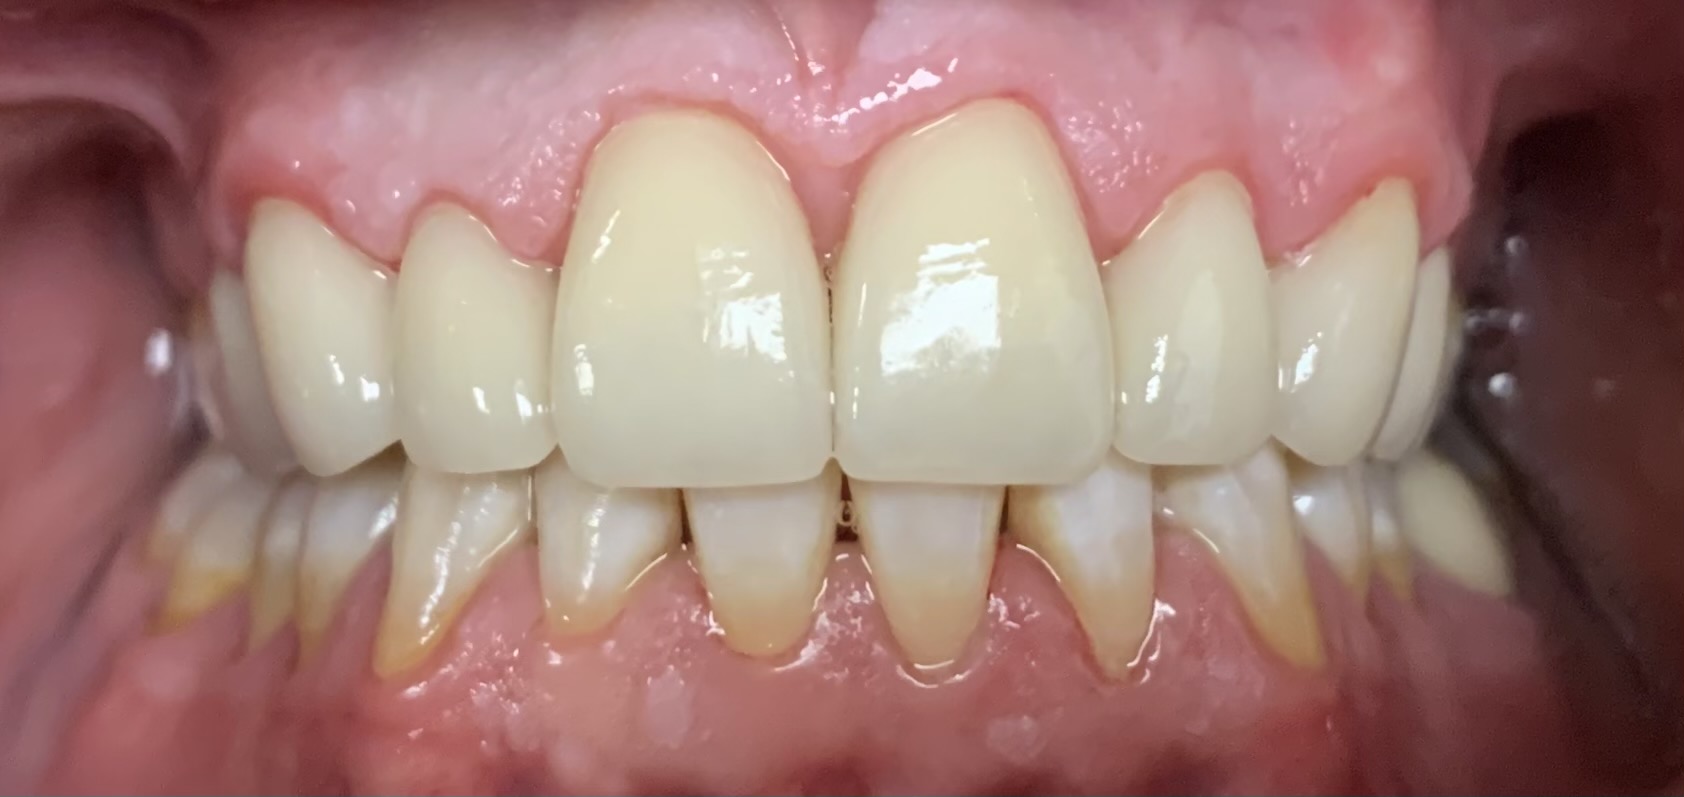 AFTER | Cosmetic dentistry, wanted realistic looking teeth